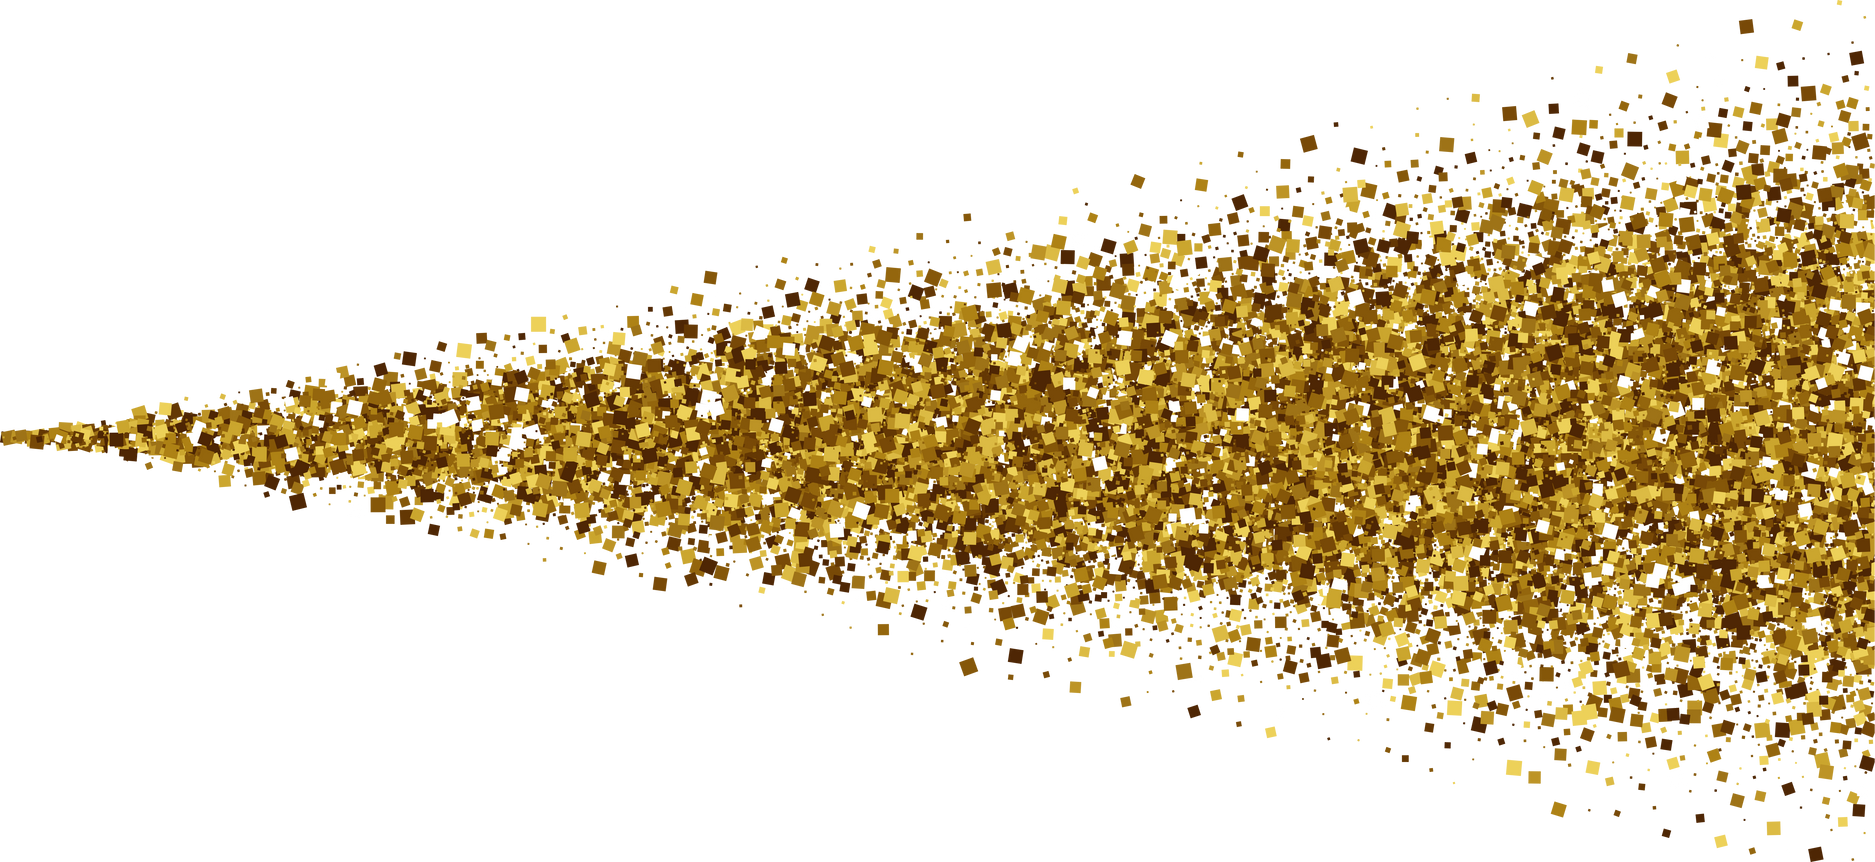 Golden Shiny Tinsel Sprayed Particles Isolated Border